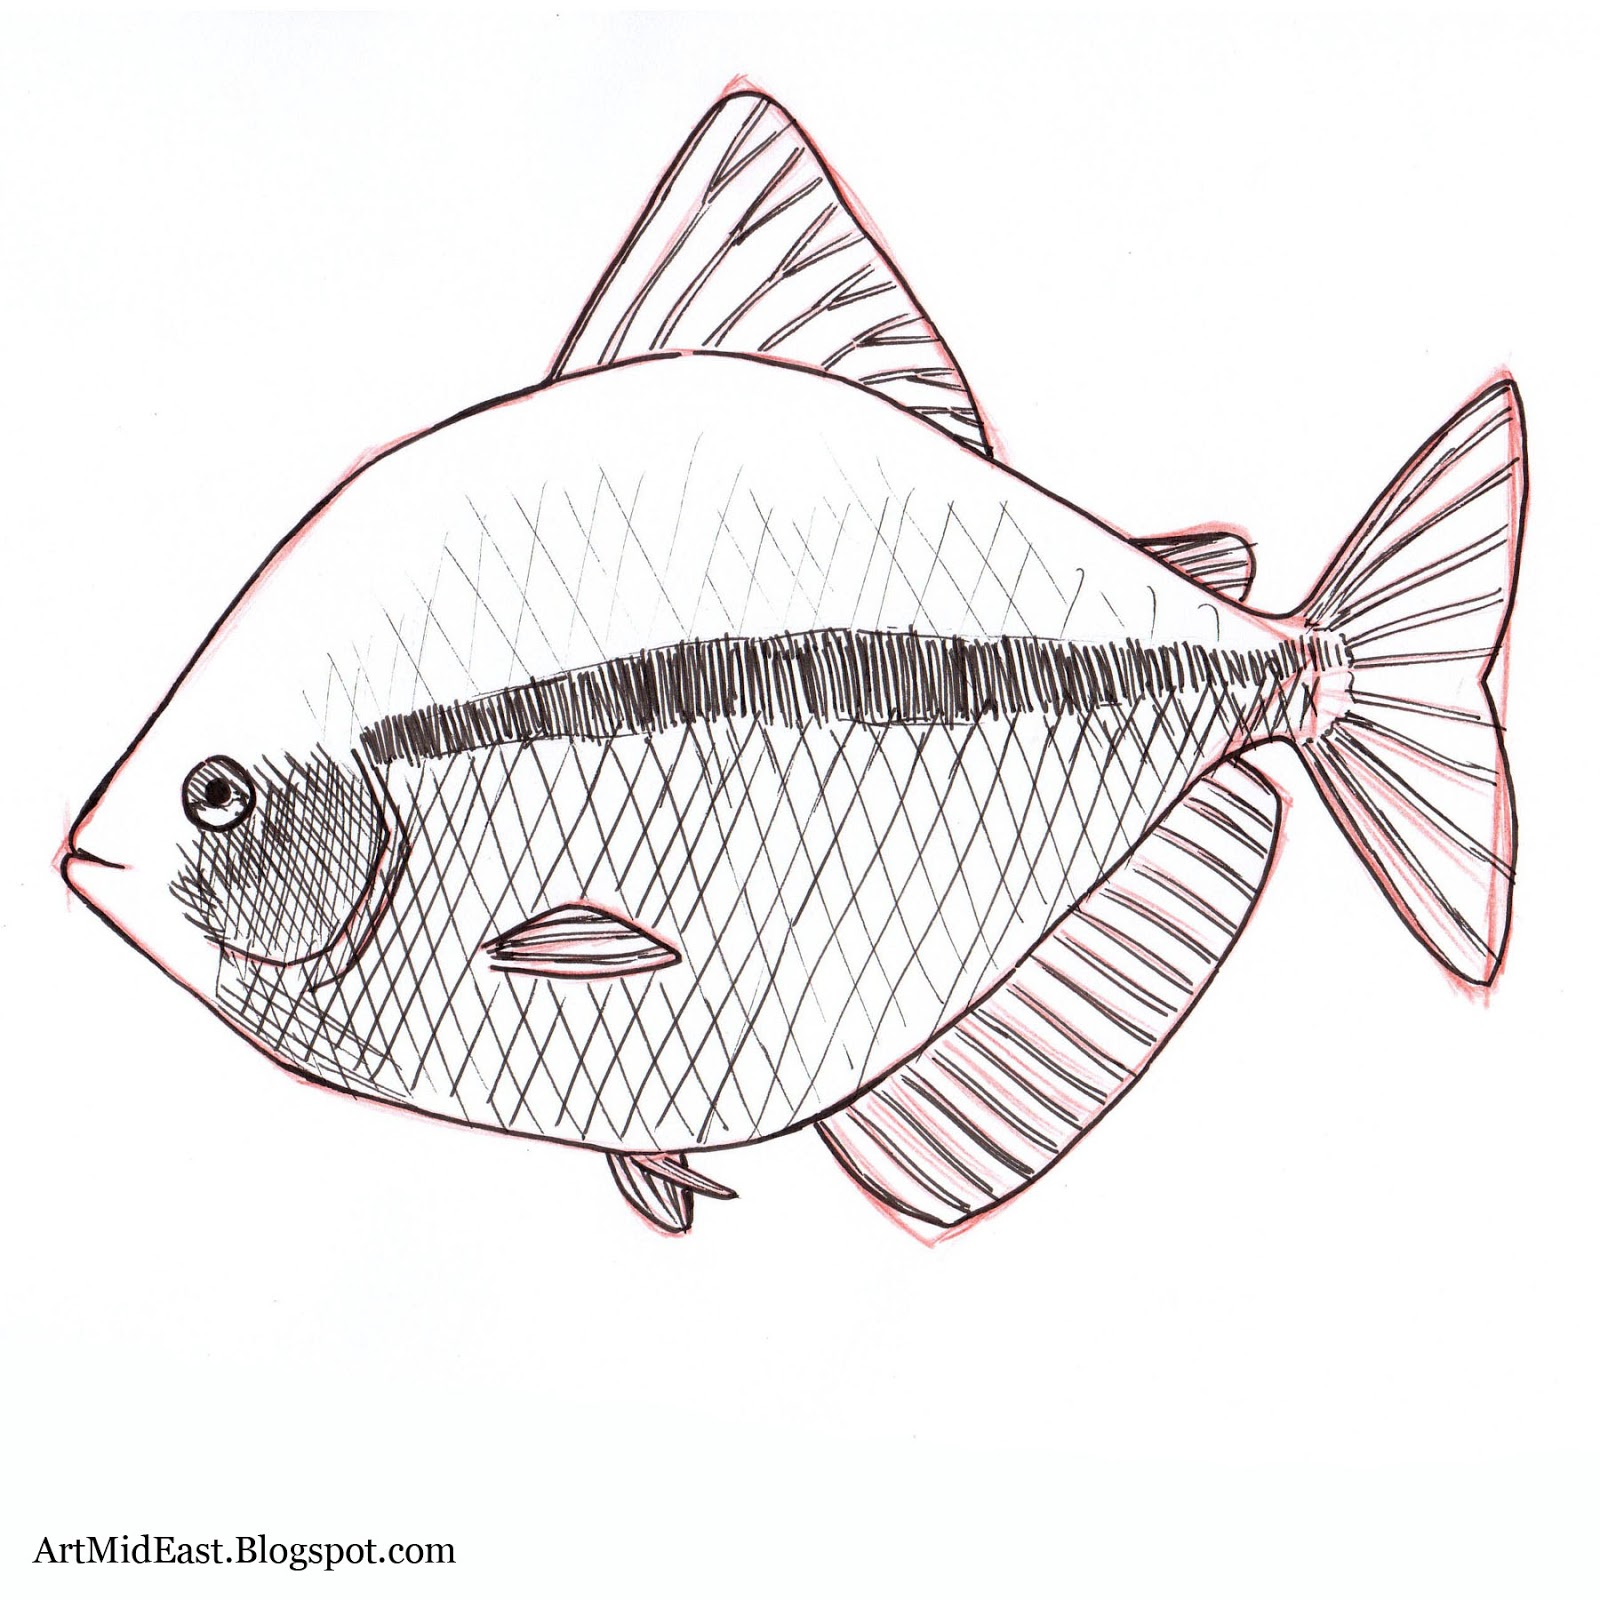 How To Draw a Fish Easy Step By Step For Beginners